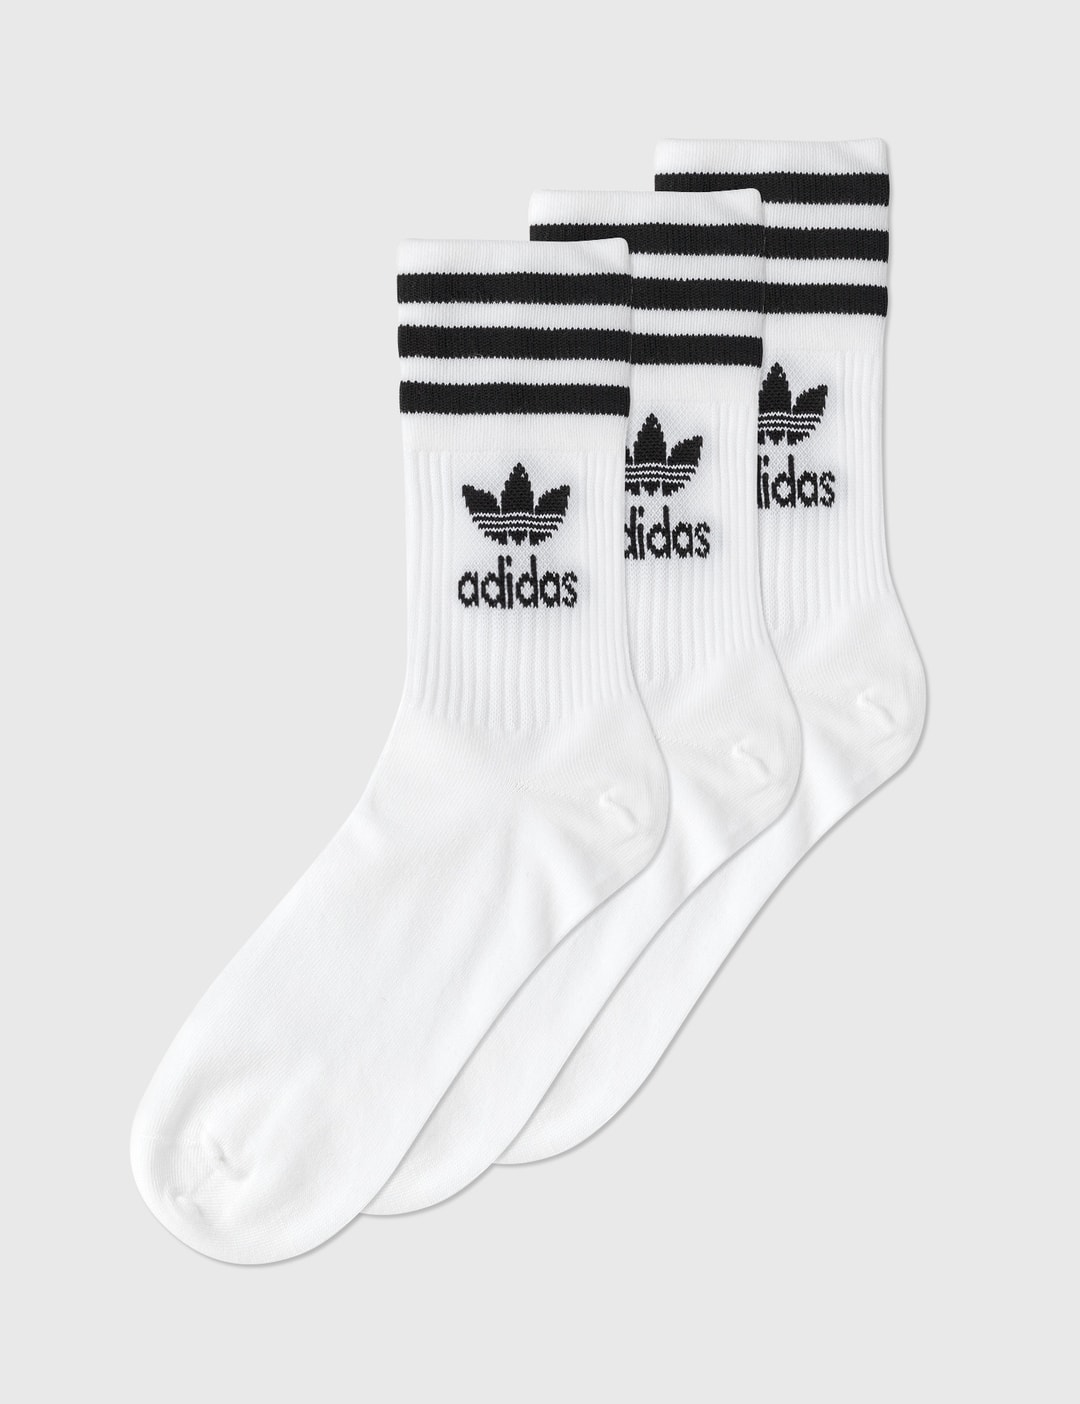 Adidas Originals - Mid Cut Crew Socks 3 Pairs | HBX - Globally Curated Fashion and by Hypebeast